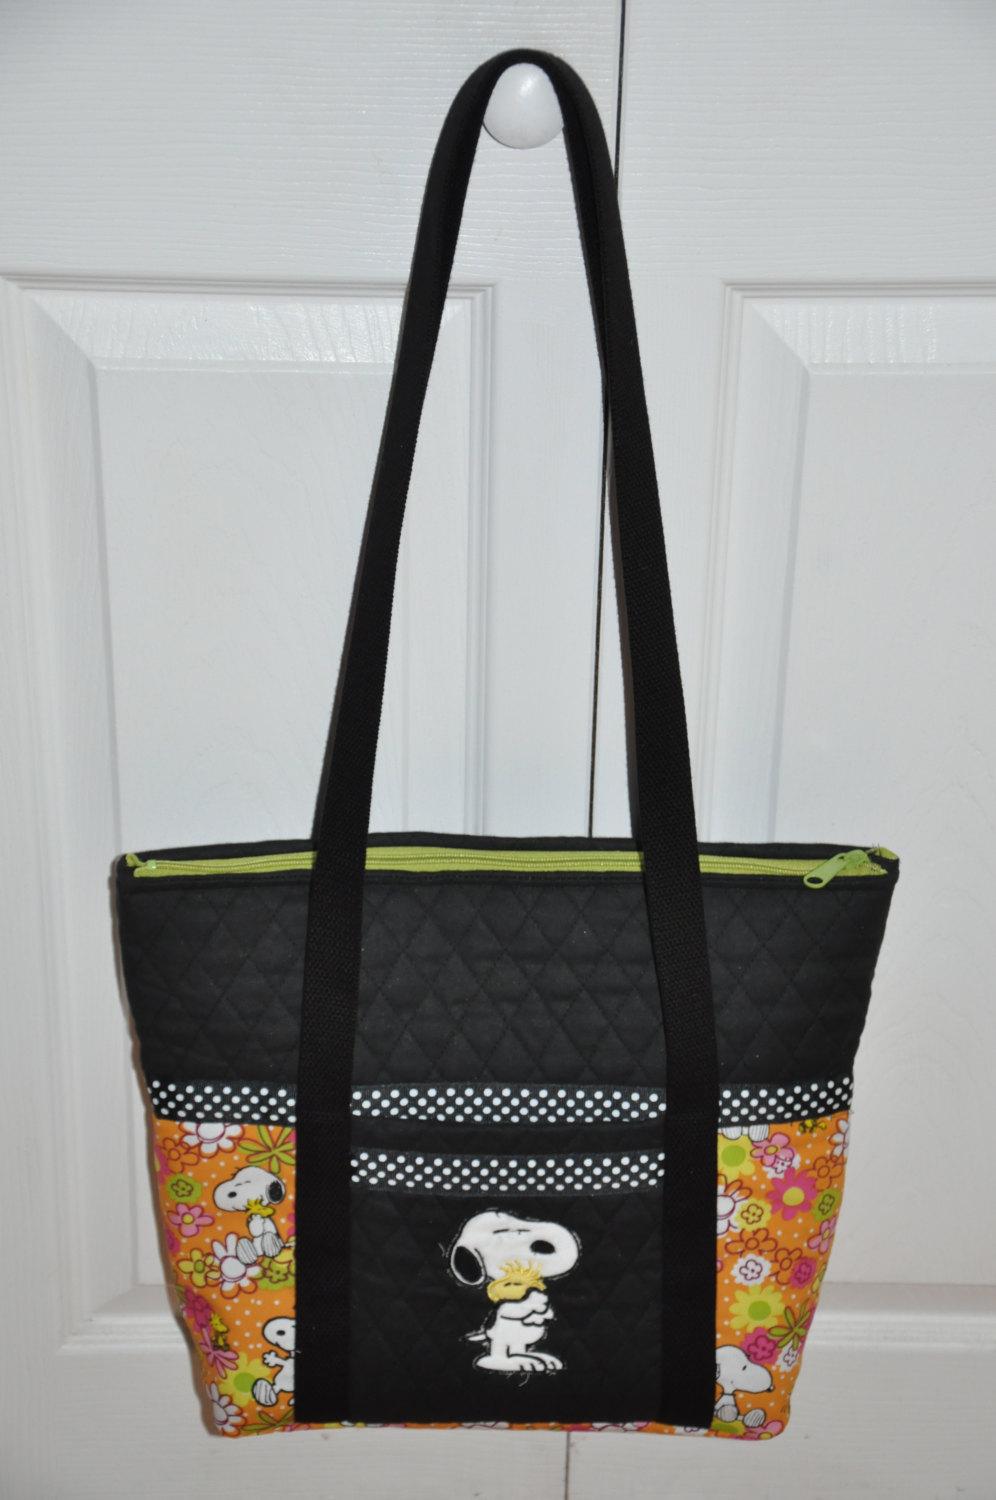 Bag with Snoopy with small friend embroidery design